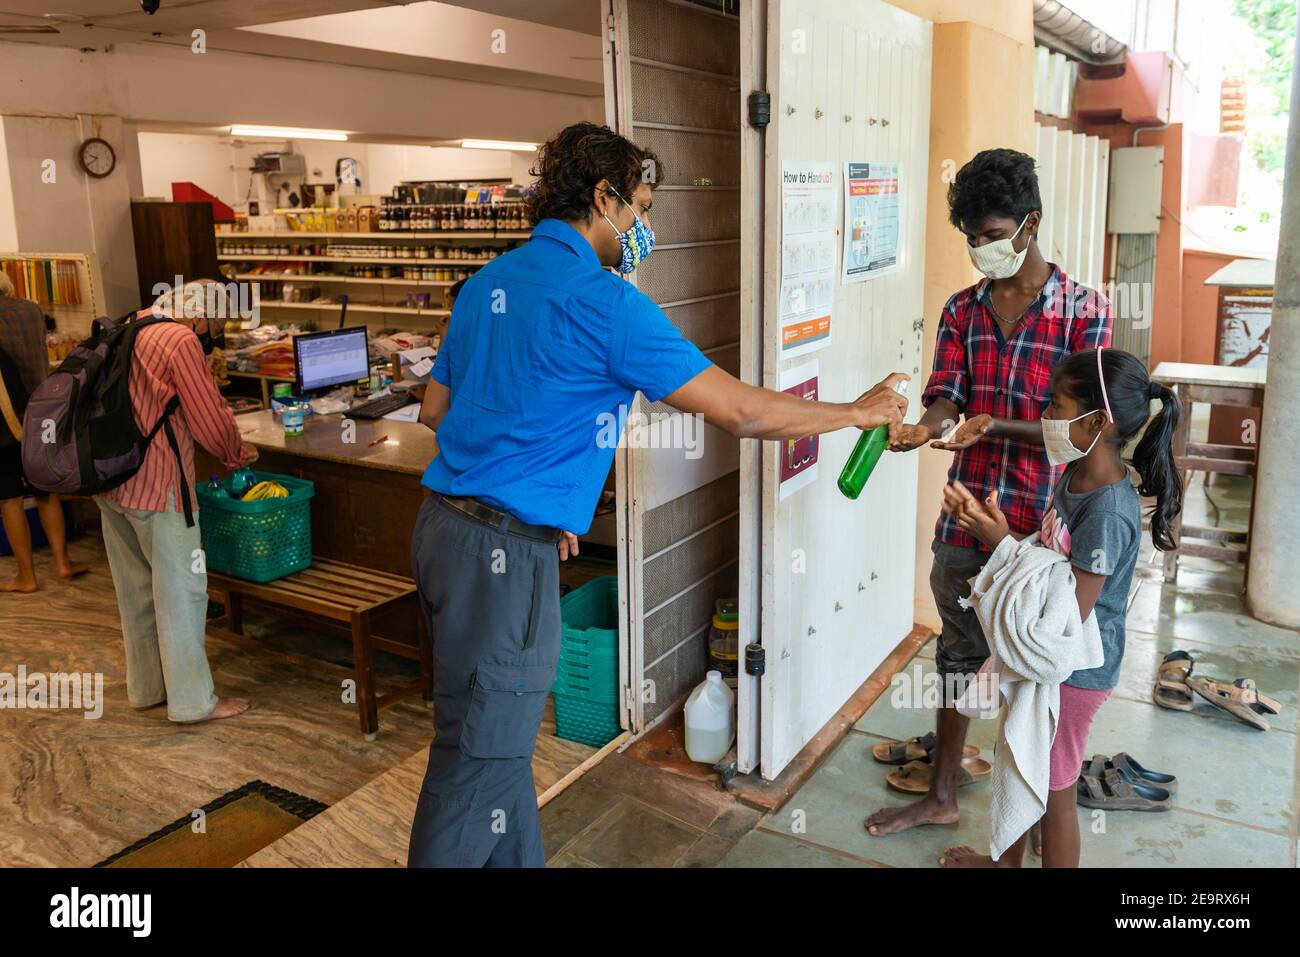 AUROVILLE, INDIA - 3 April 2020: Cleaning hands before entering a minimarket to get some food during the lockdown caused by the coronavirus. Stock Photo